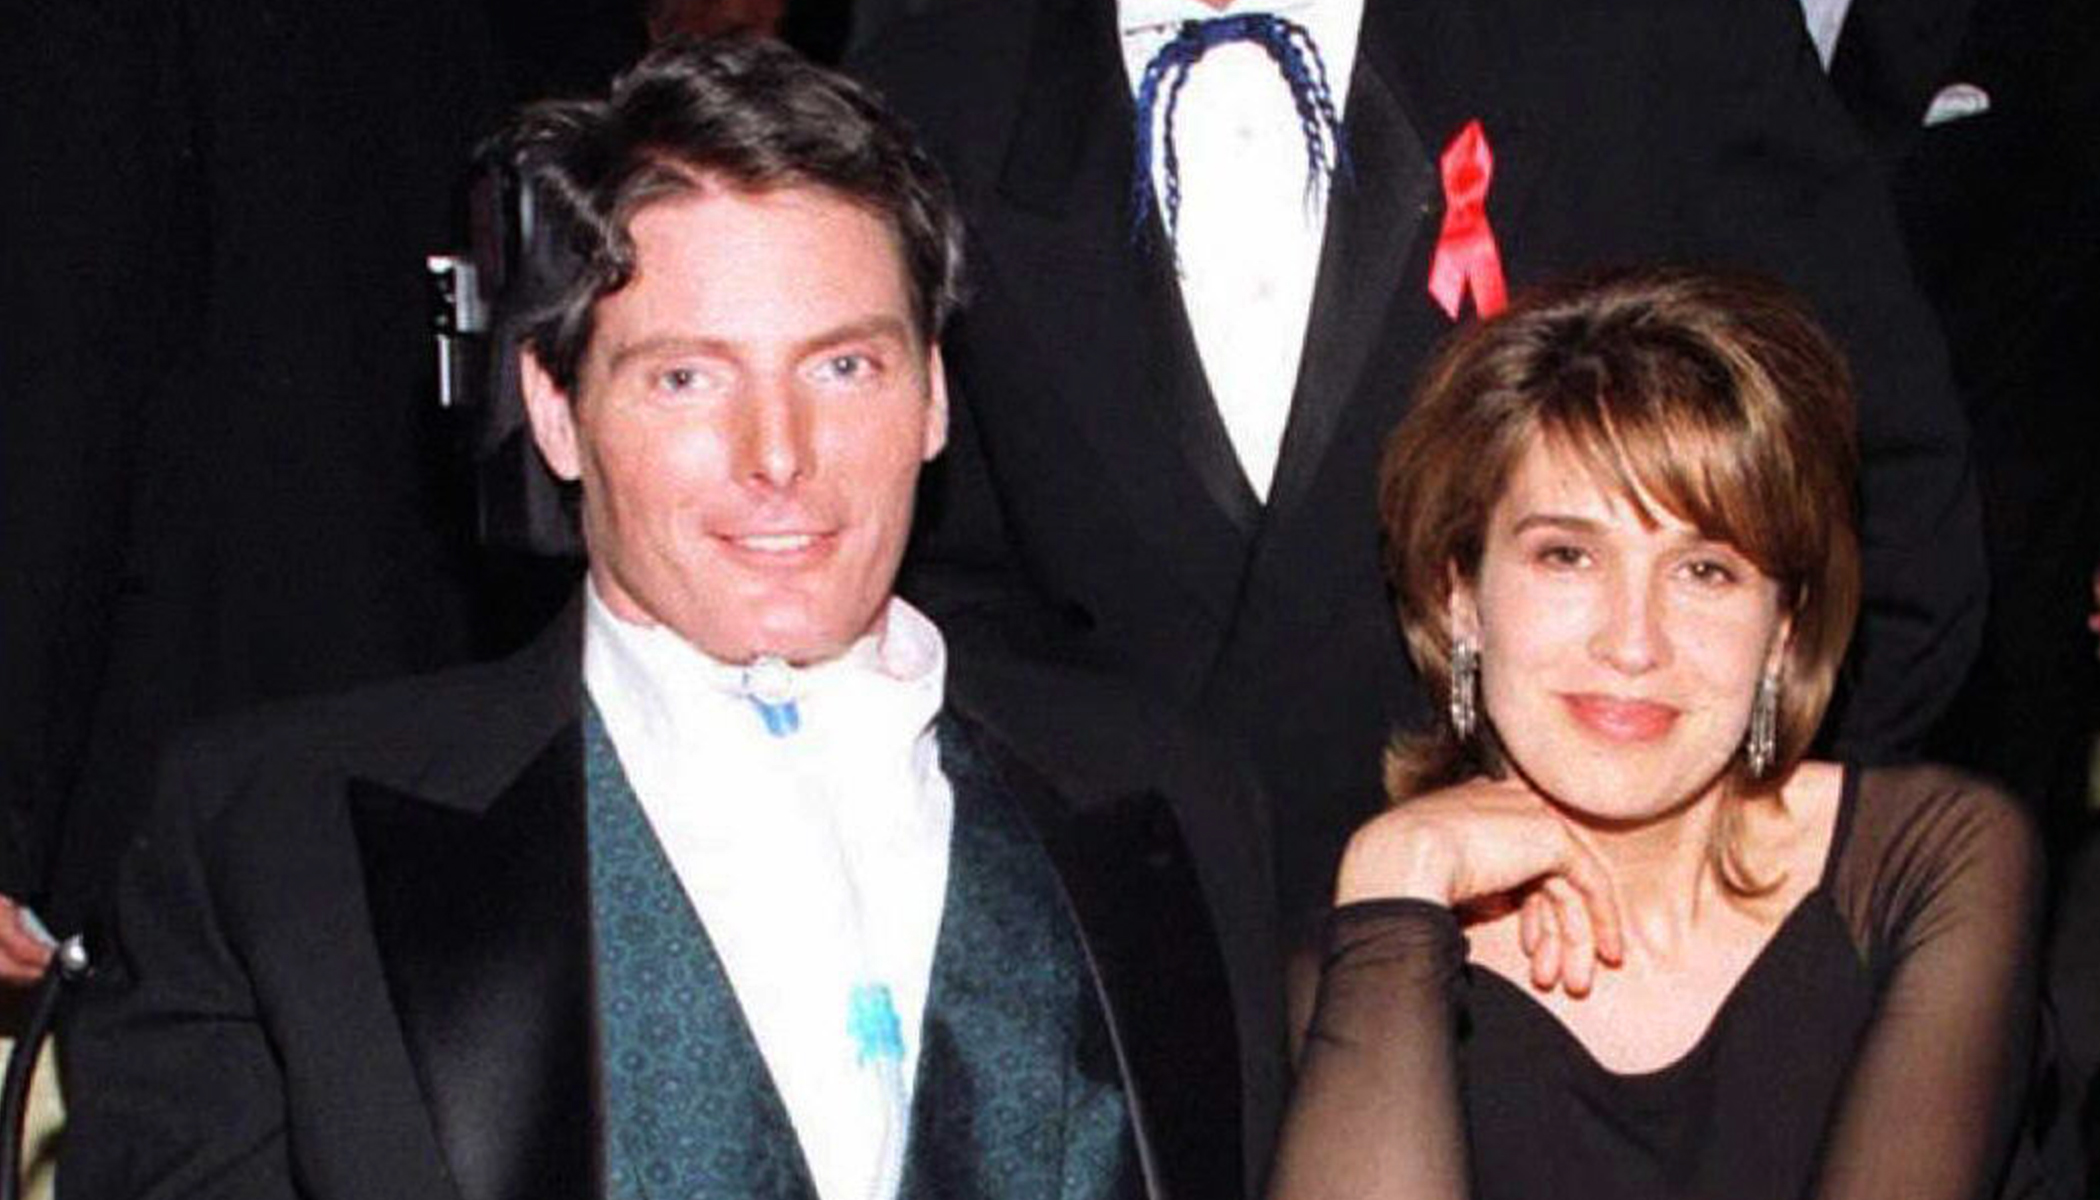 Christopher Reeve Wanted To End It After He Was Paralyzed Until He And His Wife Made A Love Pact